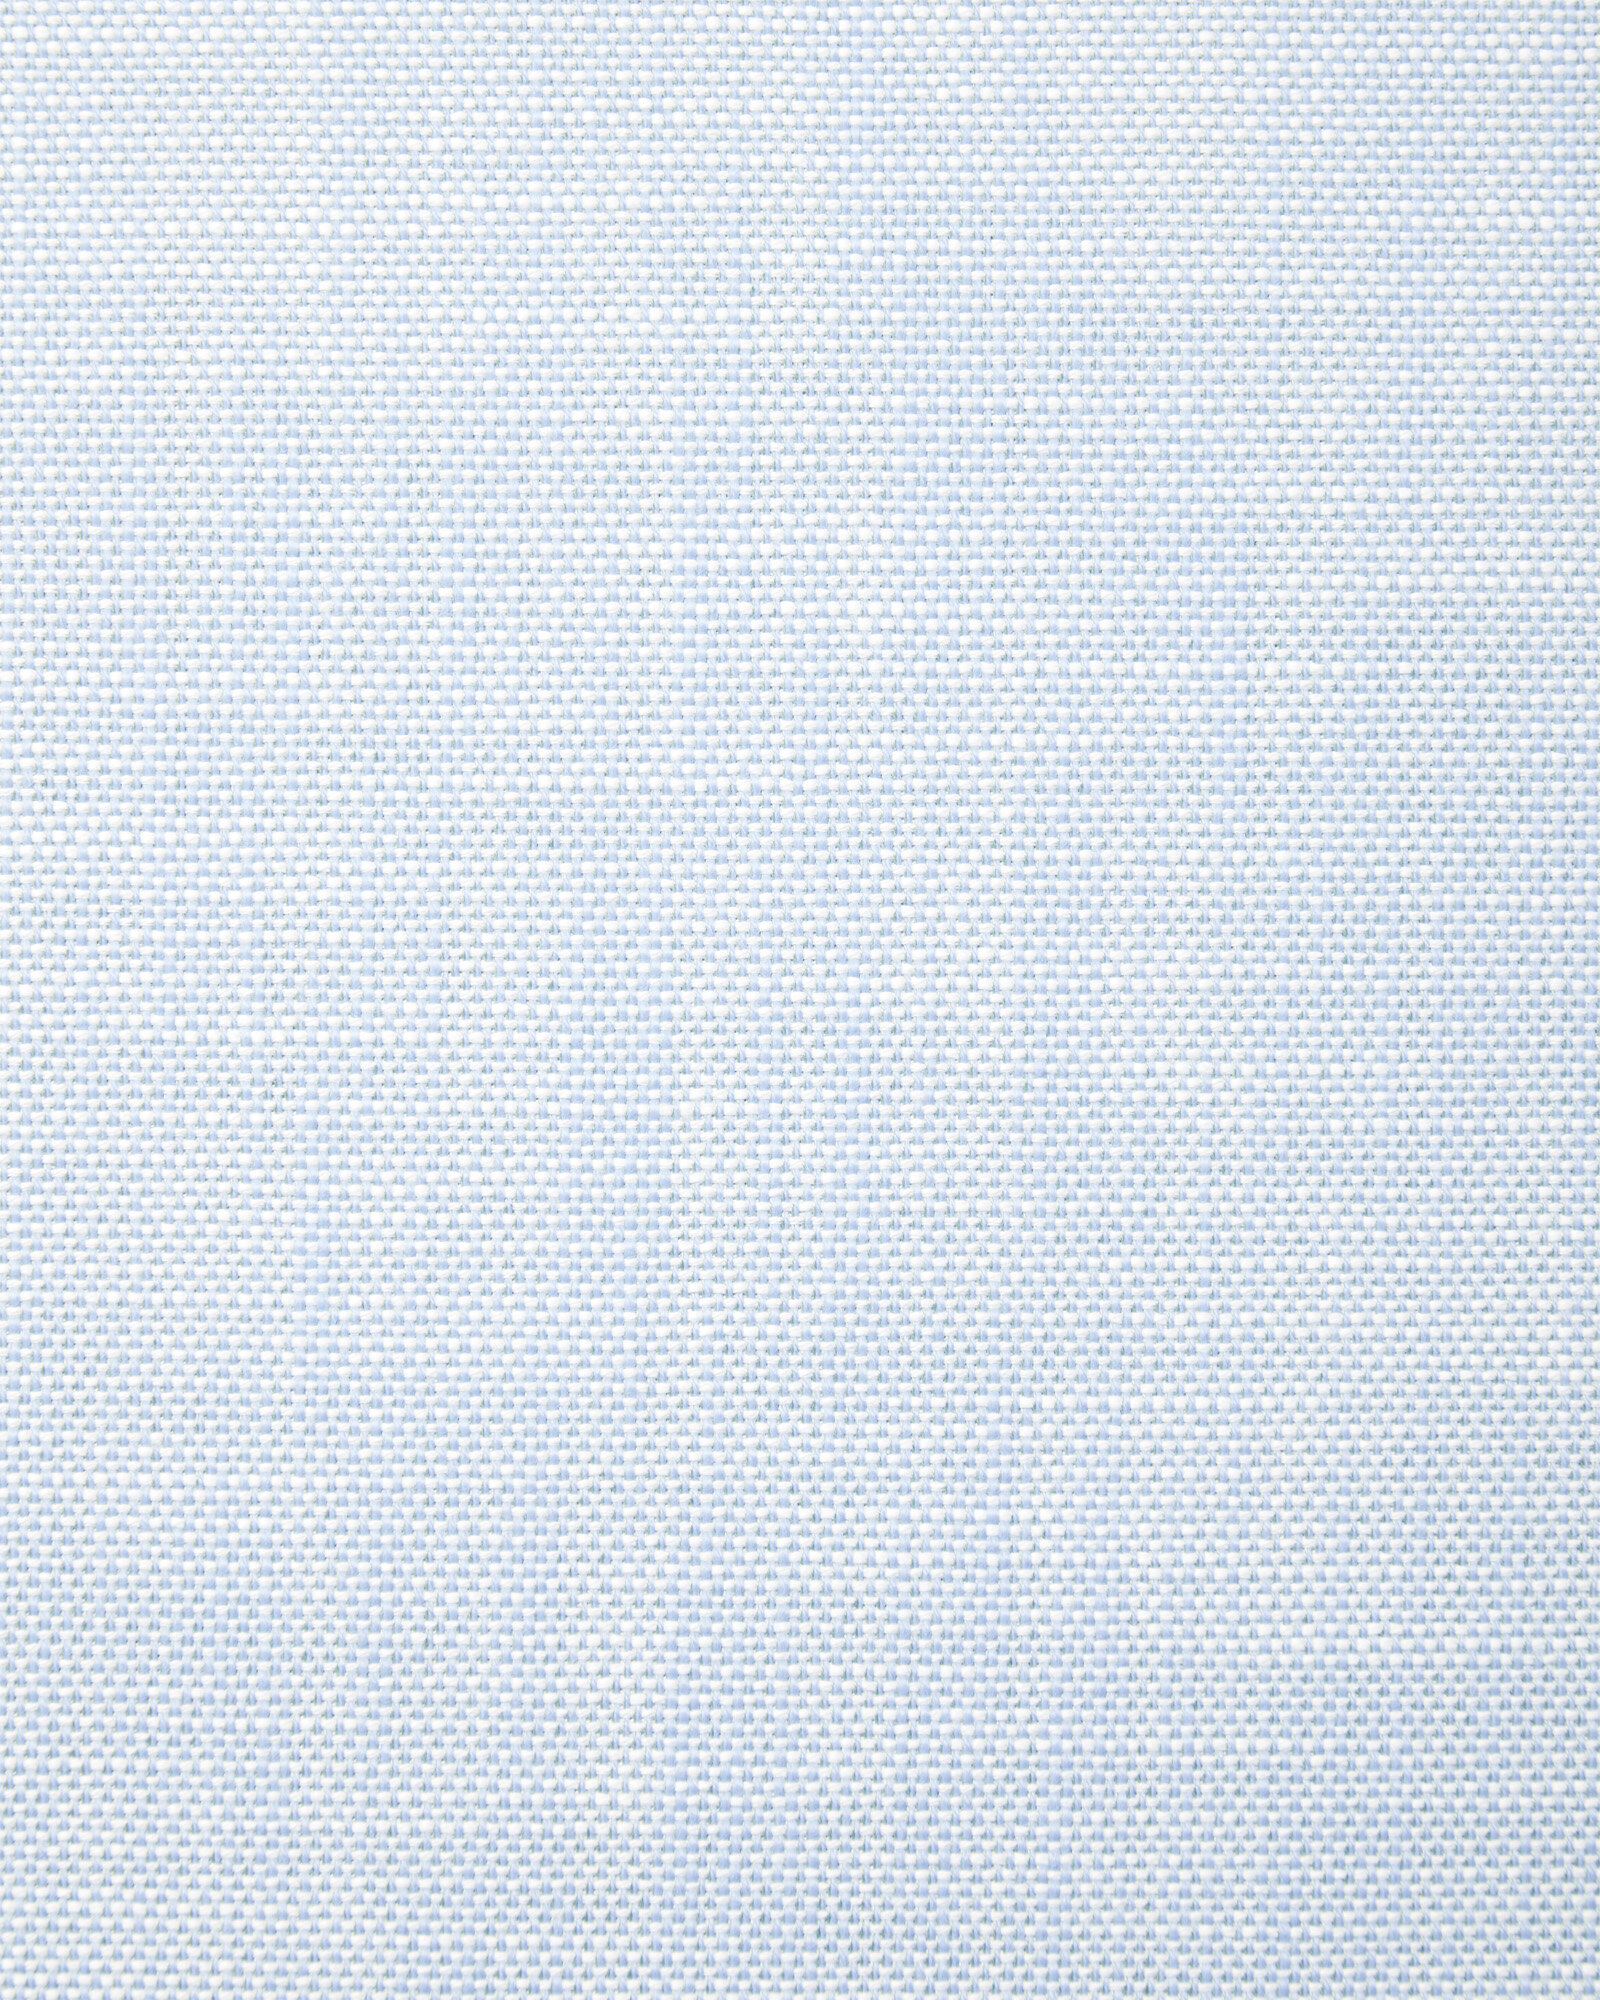 Fabric by the Yard – Perennials® Basketweave Fabric - blue - Serena and Lily.jpeg